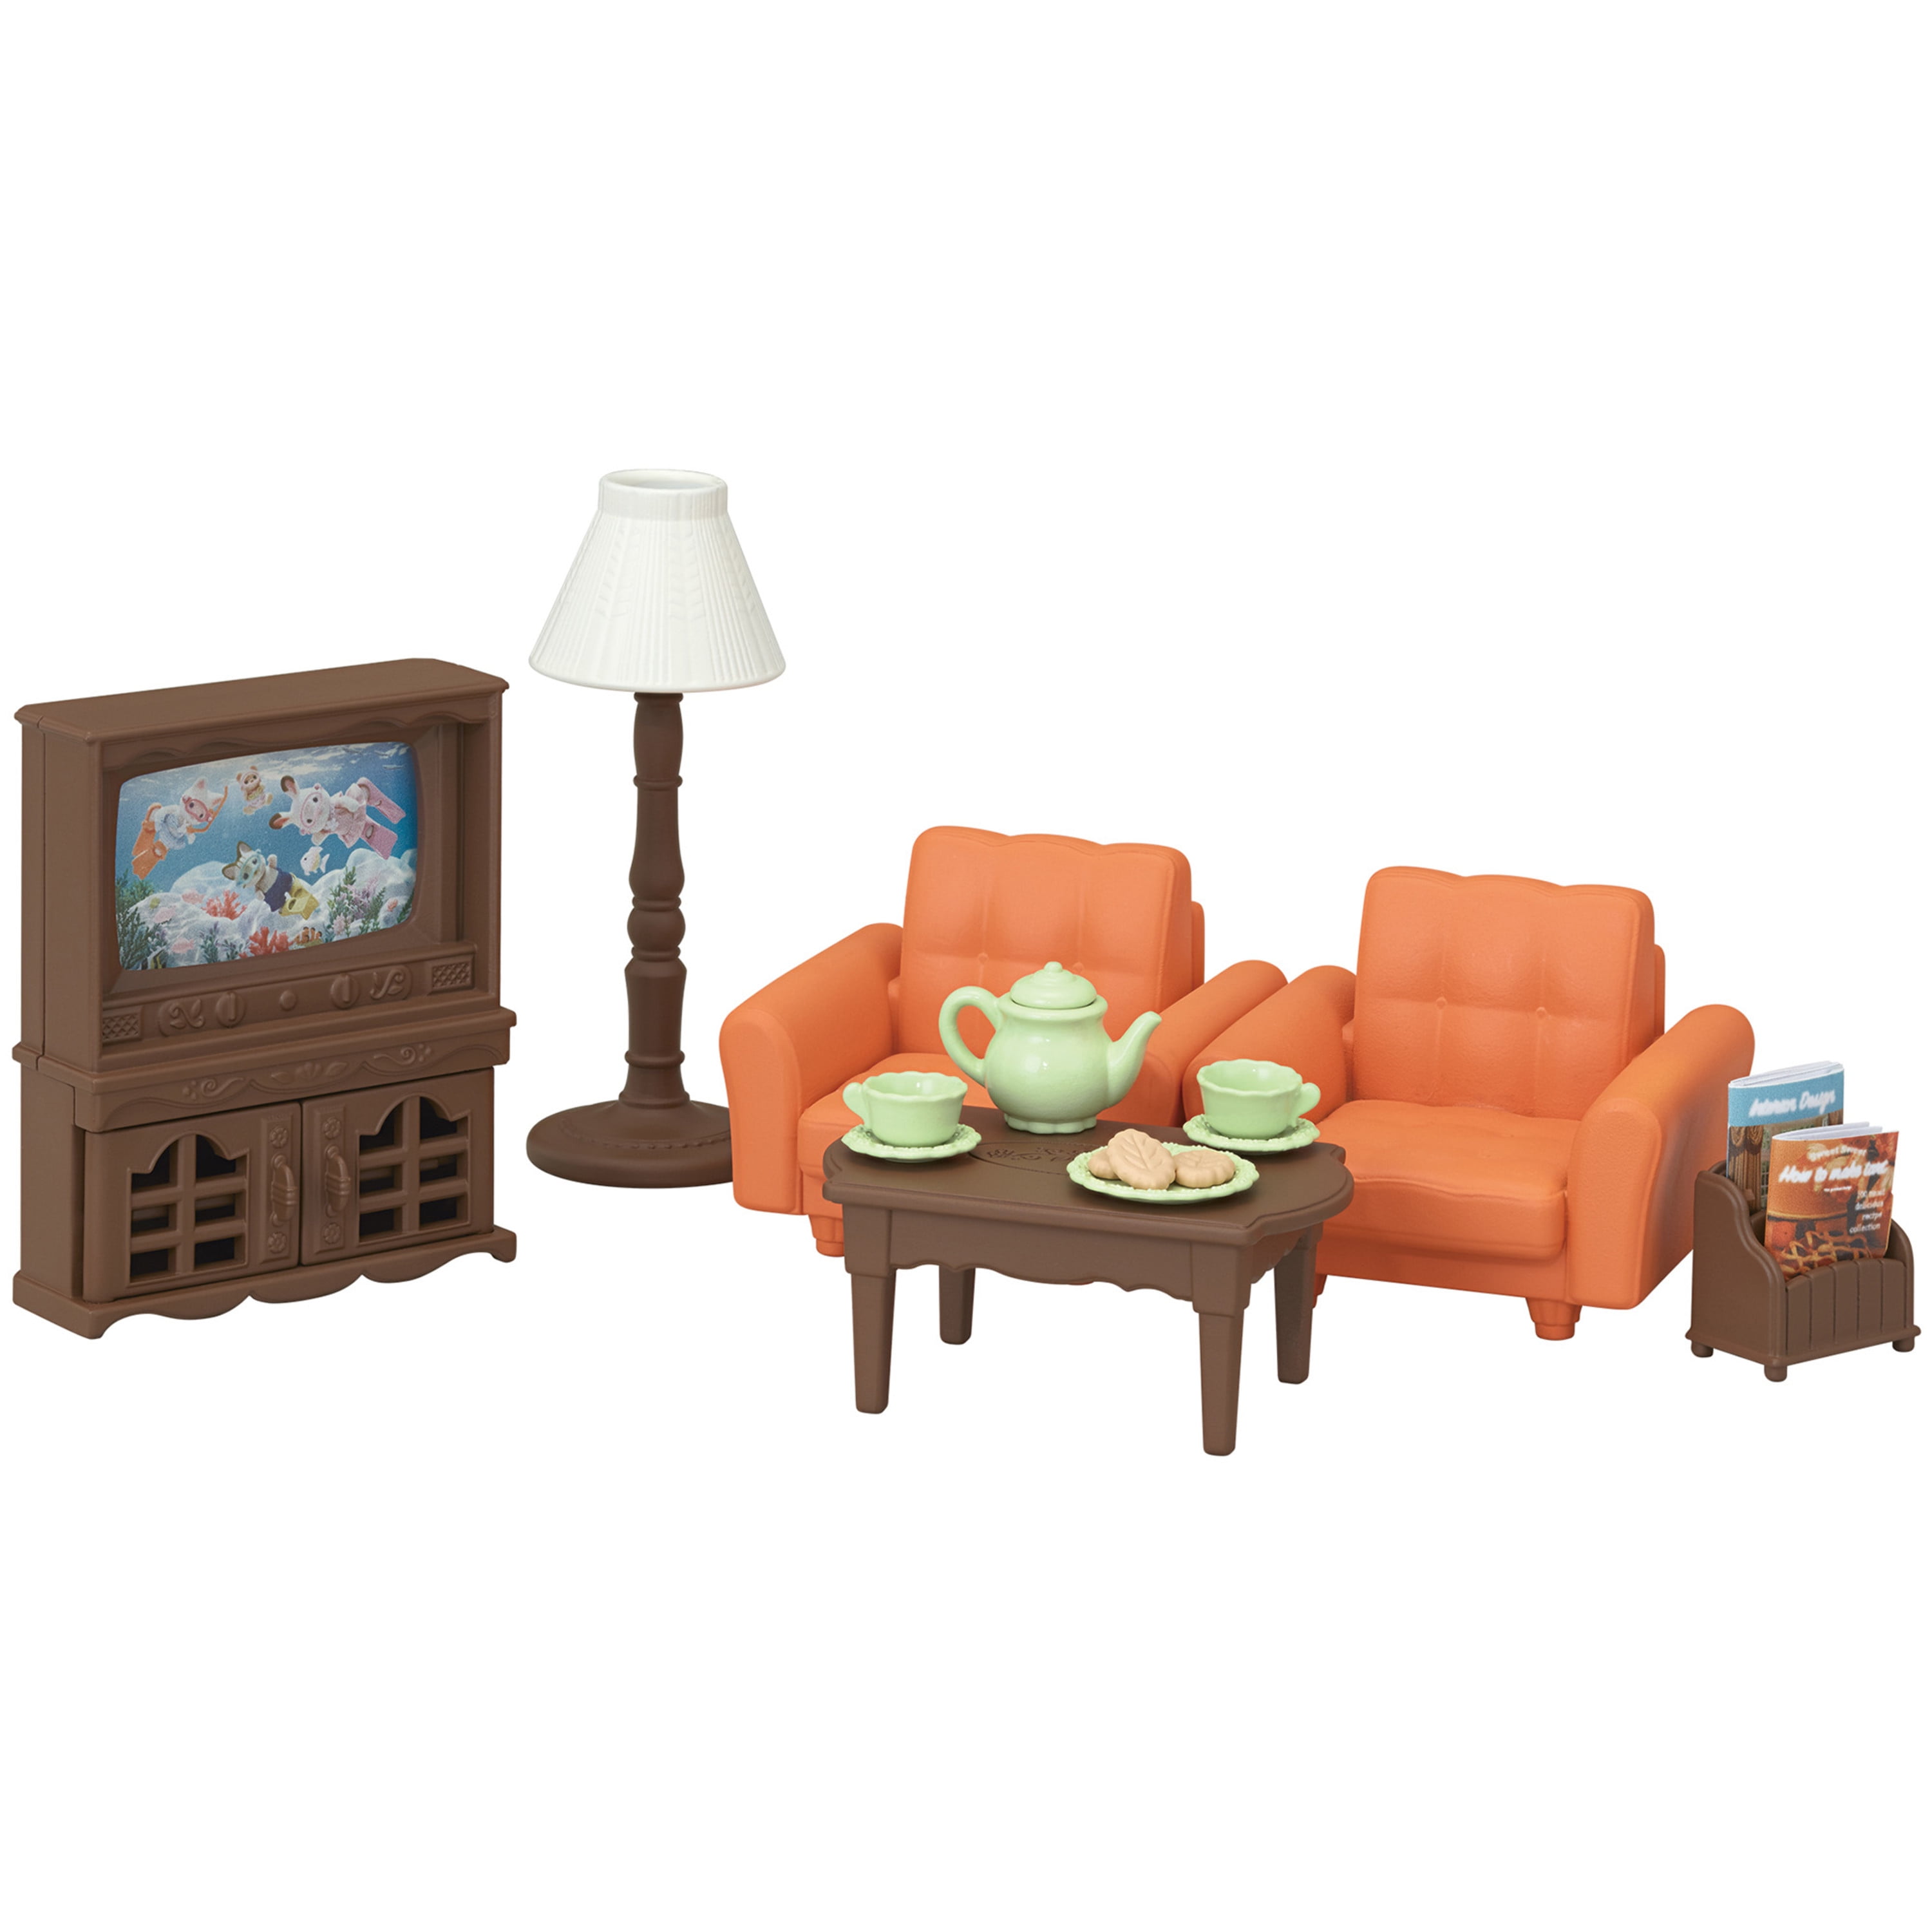 SYLVANIAN FAMILIES CALICO CRITTERS DELUXE LIVING ROOM SET GREEN & BROWN CHAIR 